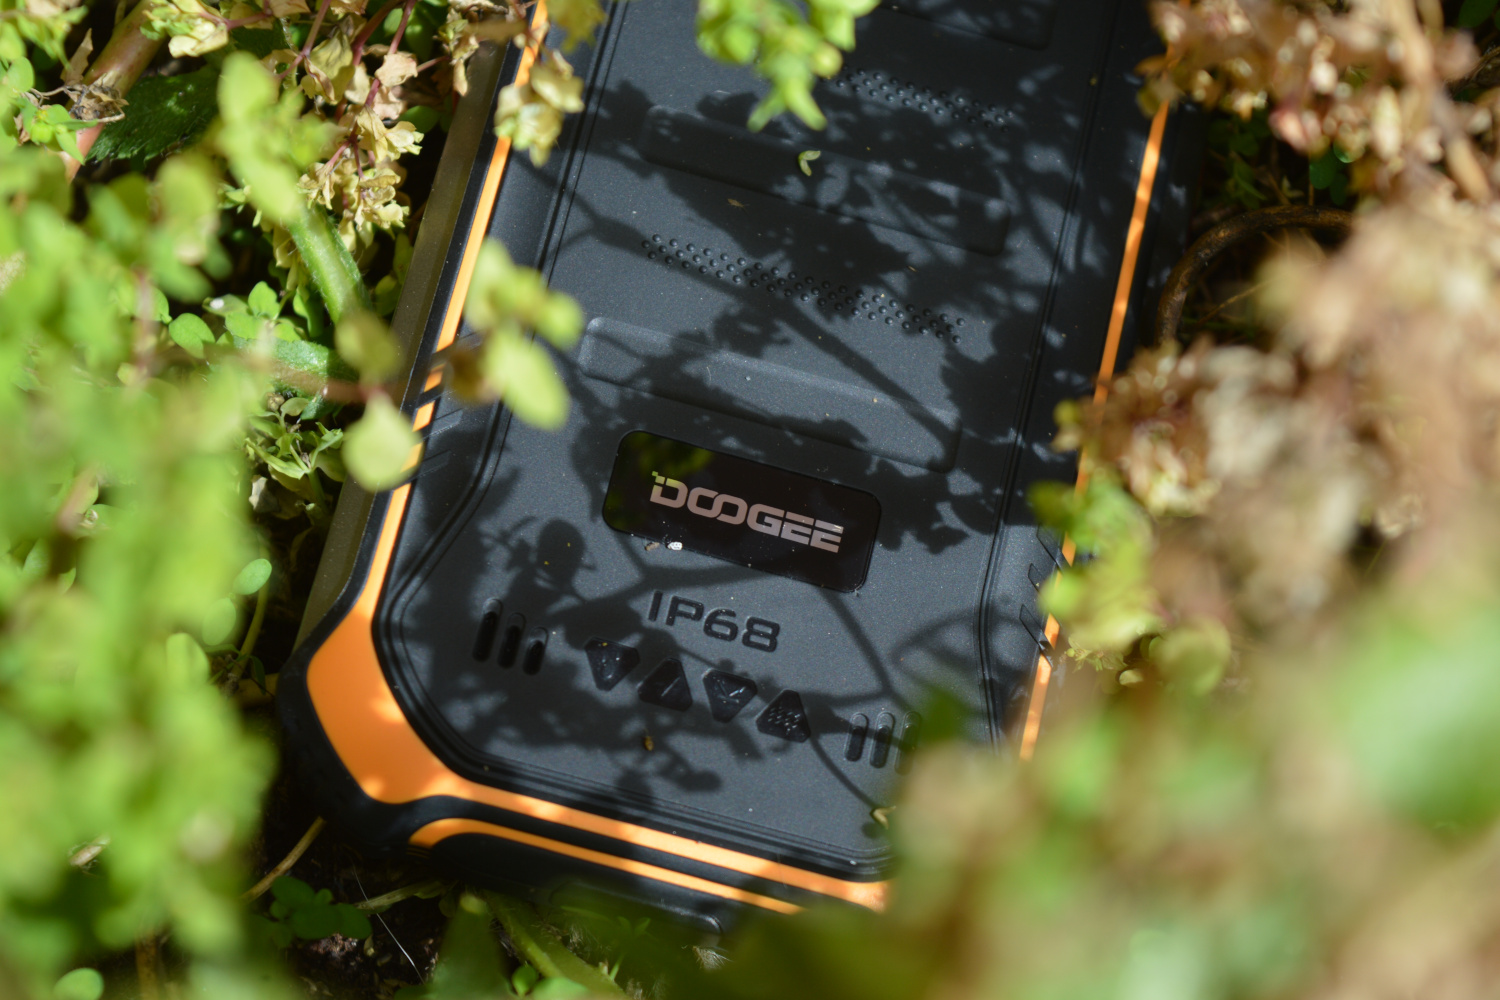 doogee s40 review in bush close up logo